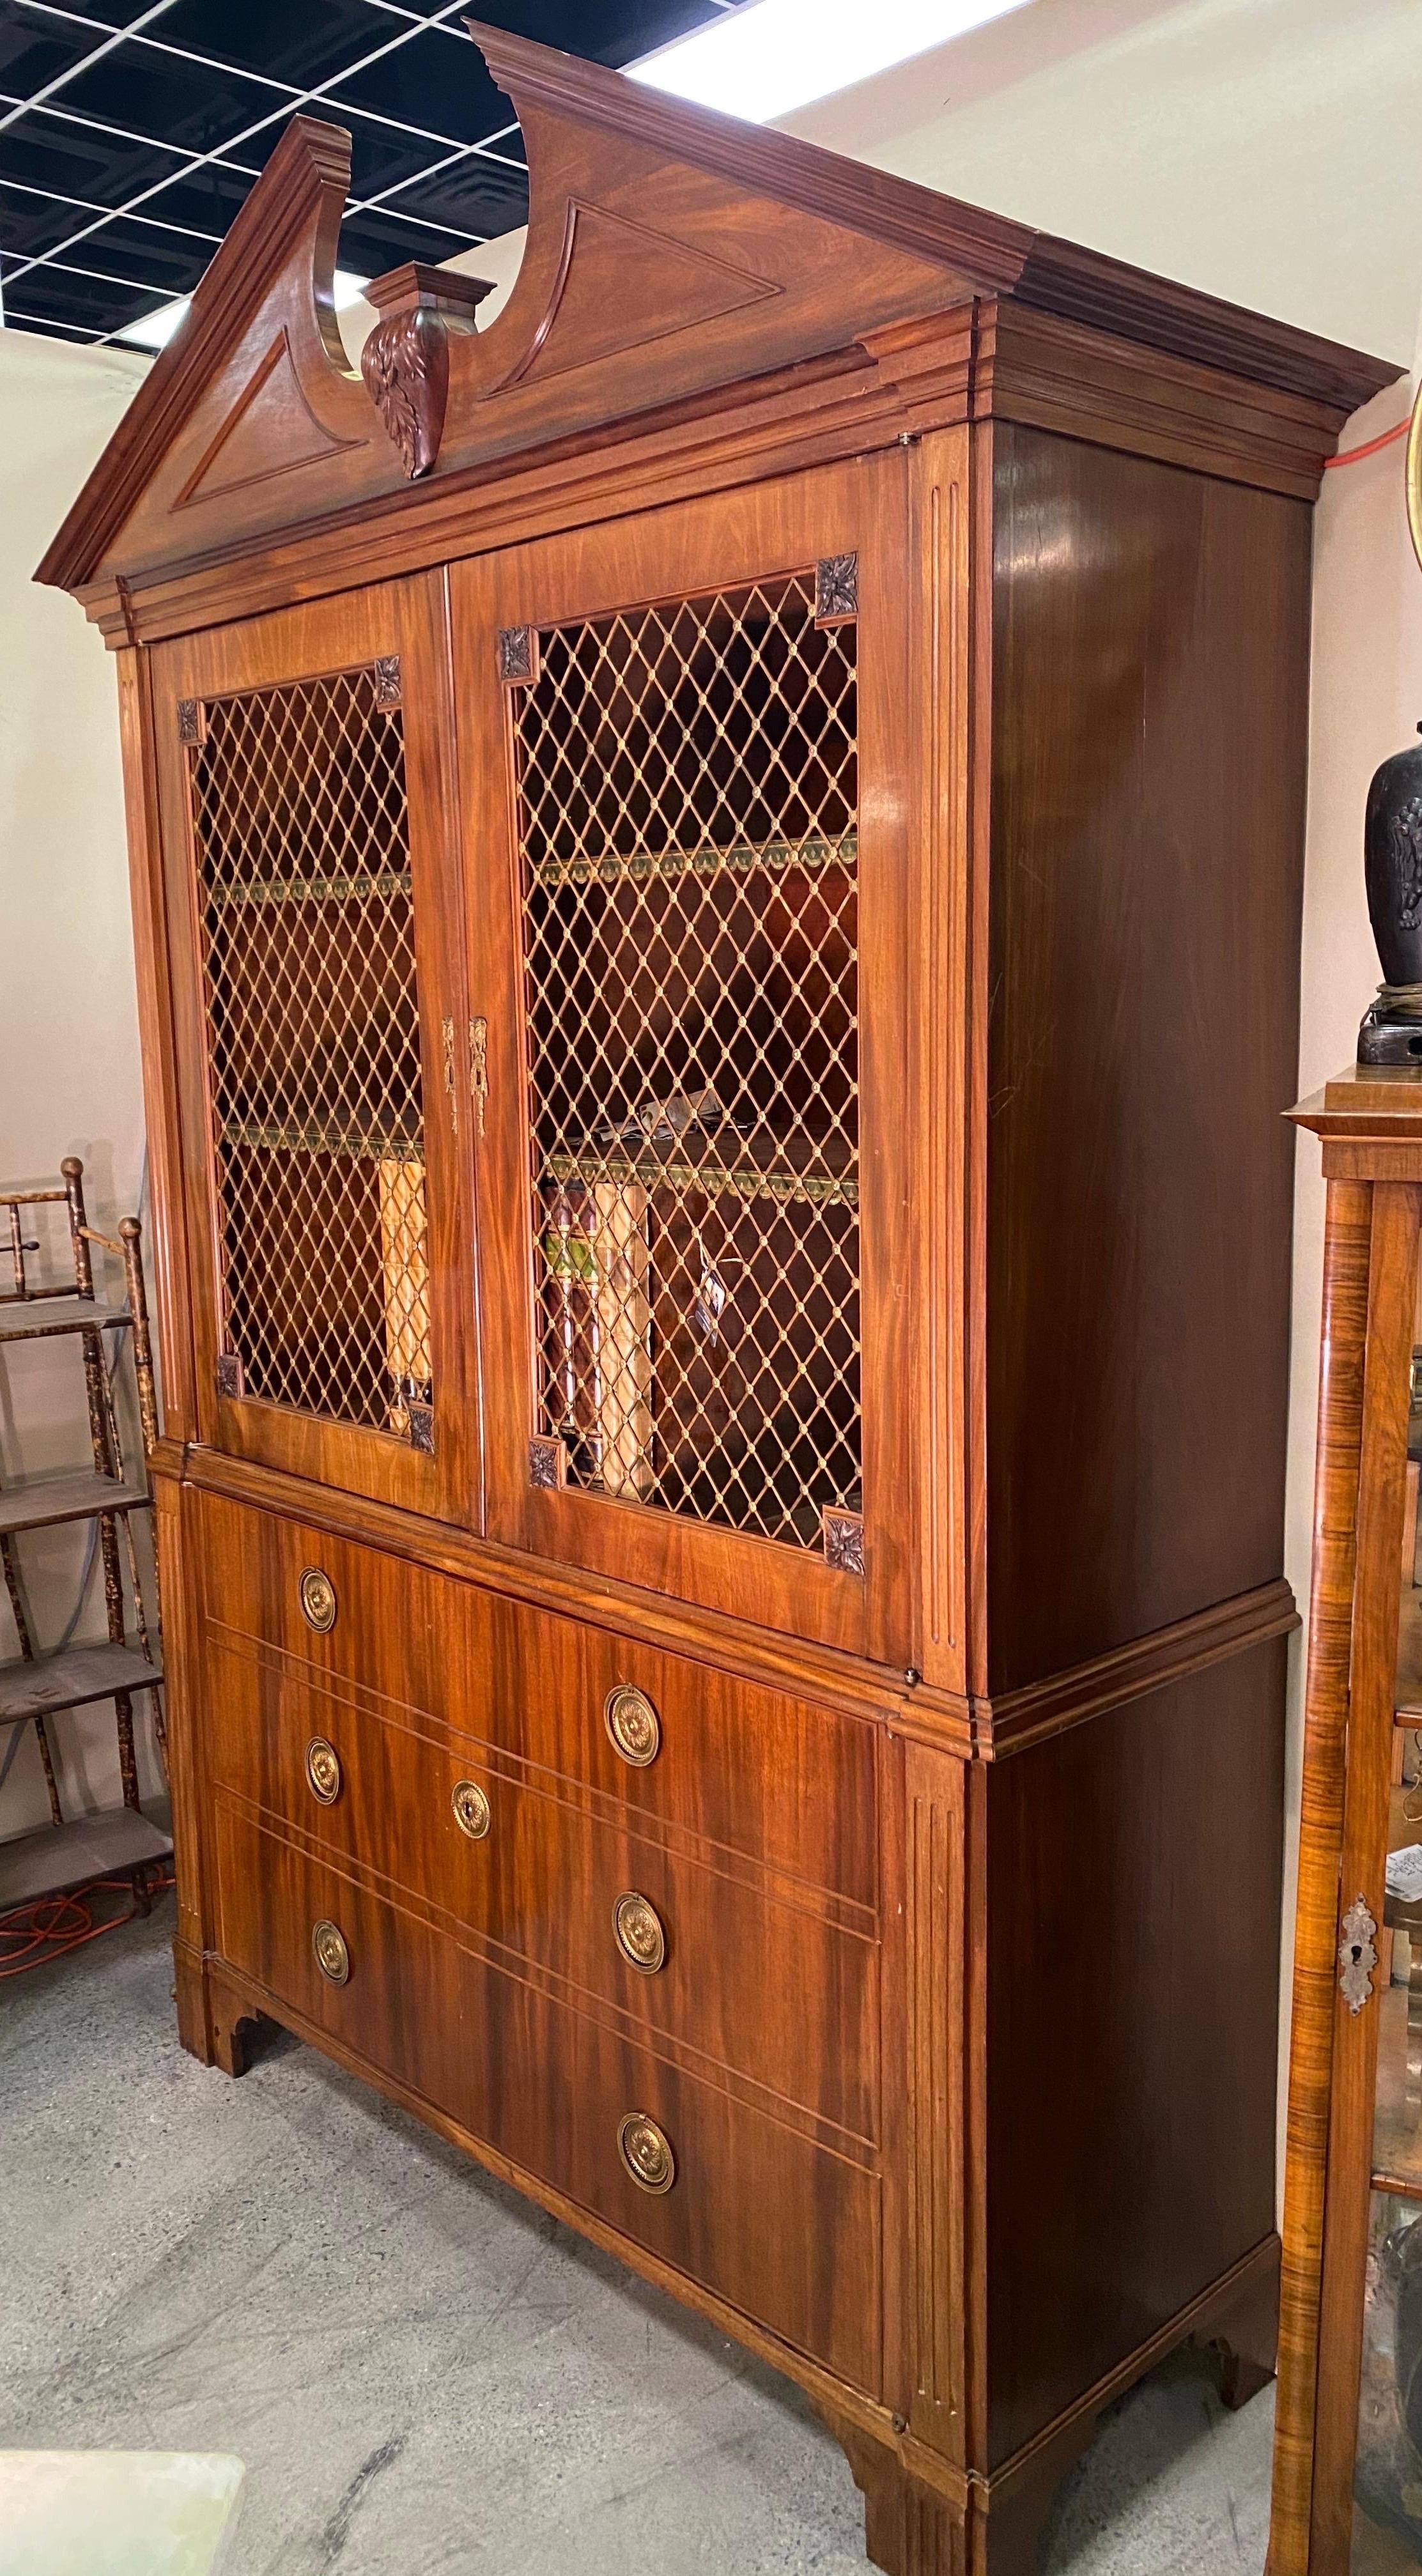 Early 20th century Georgian style English or Dutch mahogany cabinet with sliding faux book safe. Great quality mahogany, bronze eschuteons and grill work. Doors open to reveal shelves and a group of faux books that slide to reveal a cut out space